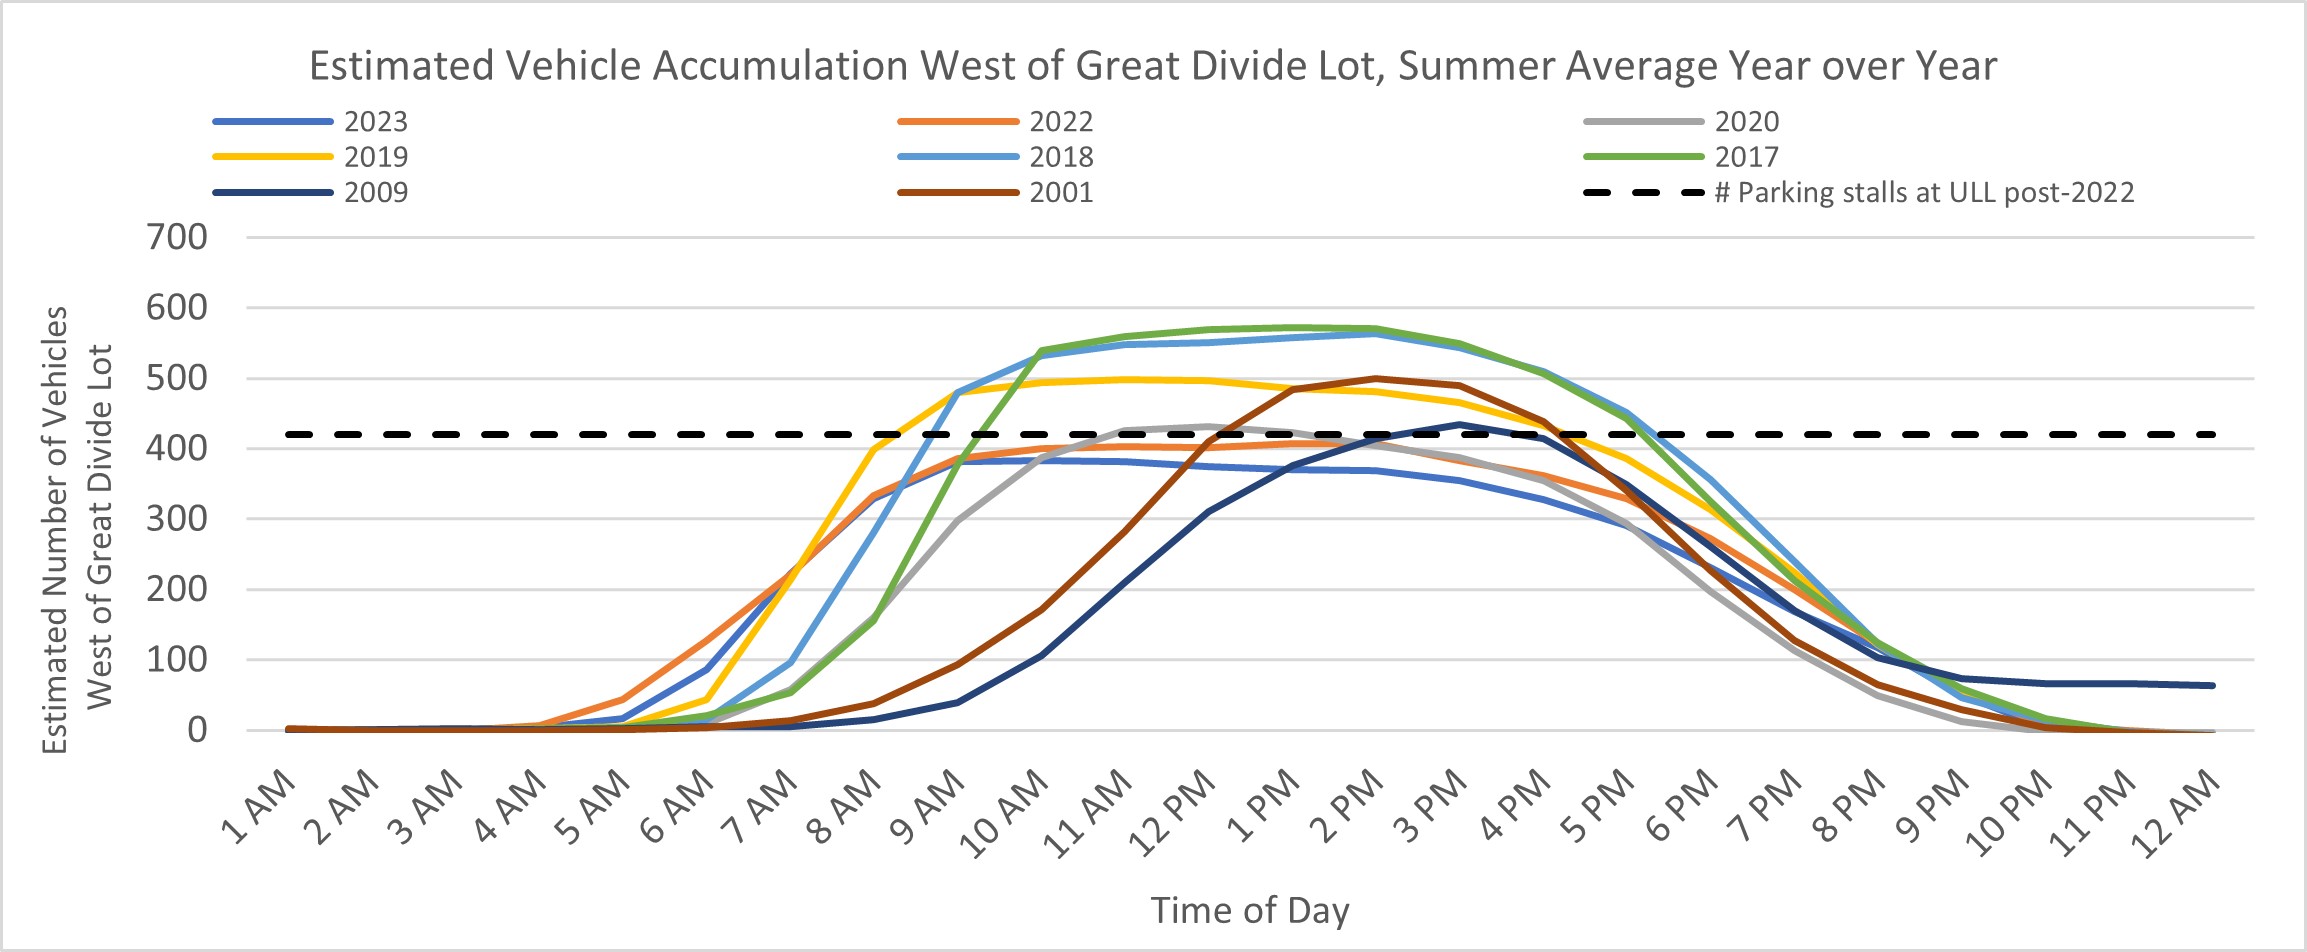 Graphic of Estimated Vehicle Accumulation West of Great Divide Lot, Summer Average Year over Year. More details provided in the text version below. 